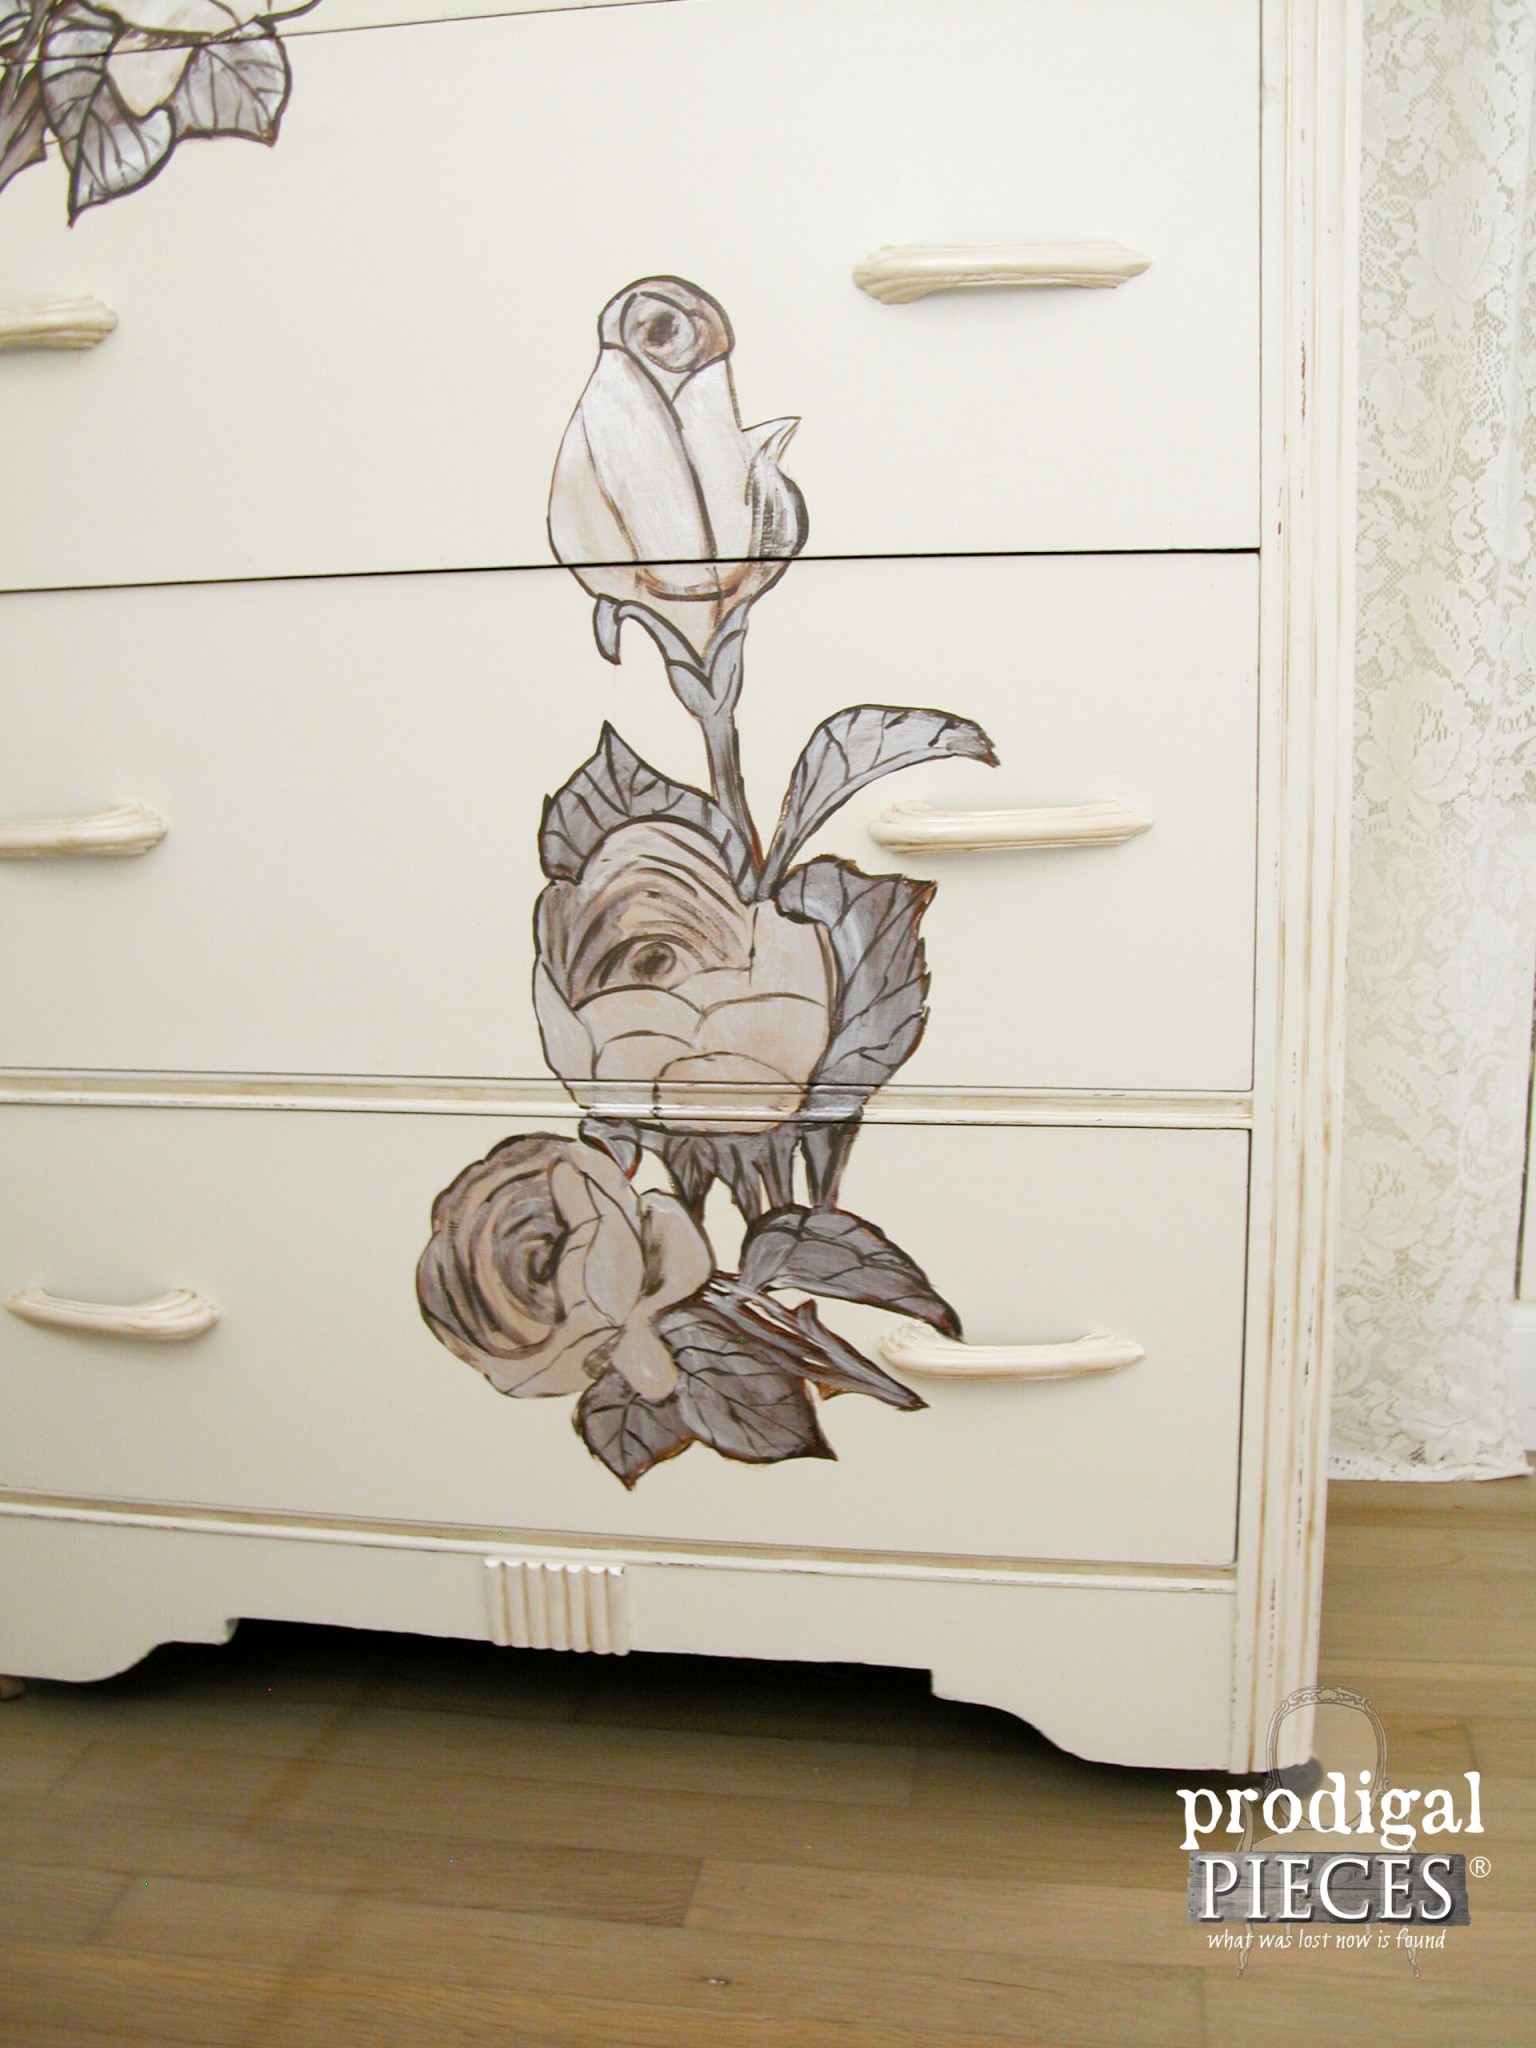 Shabby Chic Roses added to Art Deco Chest by Prodigal Pieces | www.prodigalpieces.com